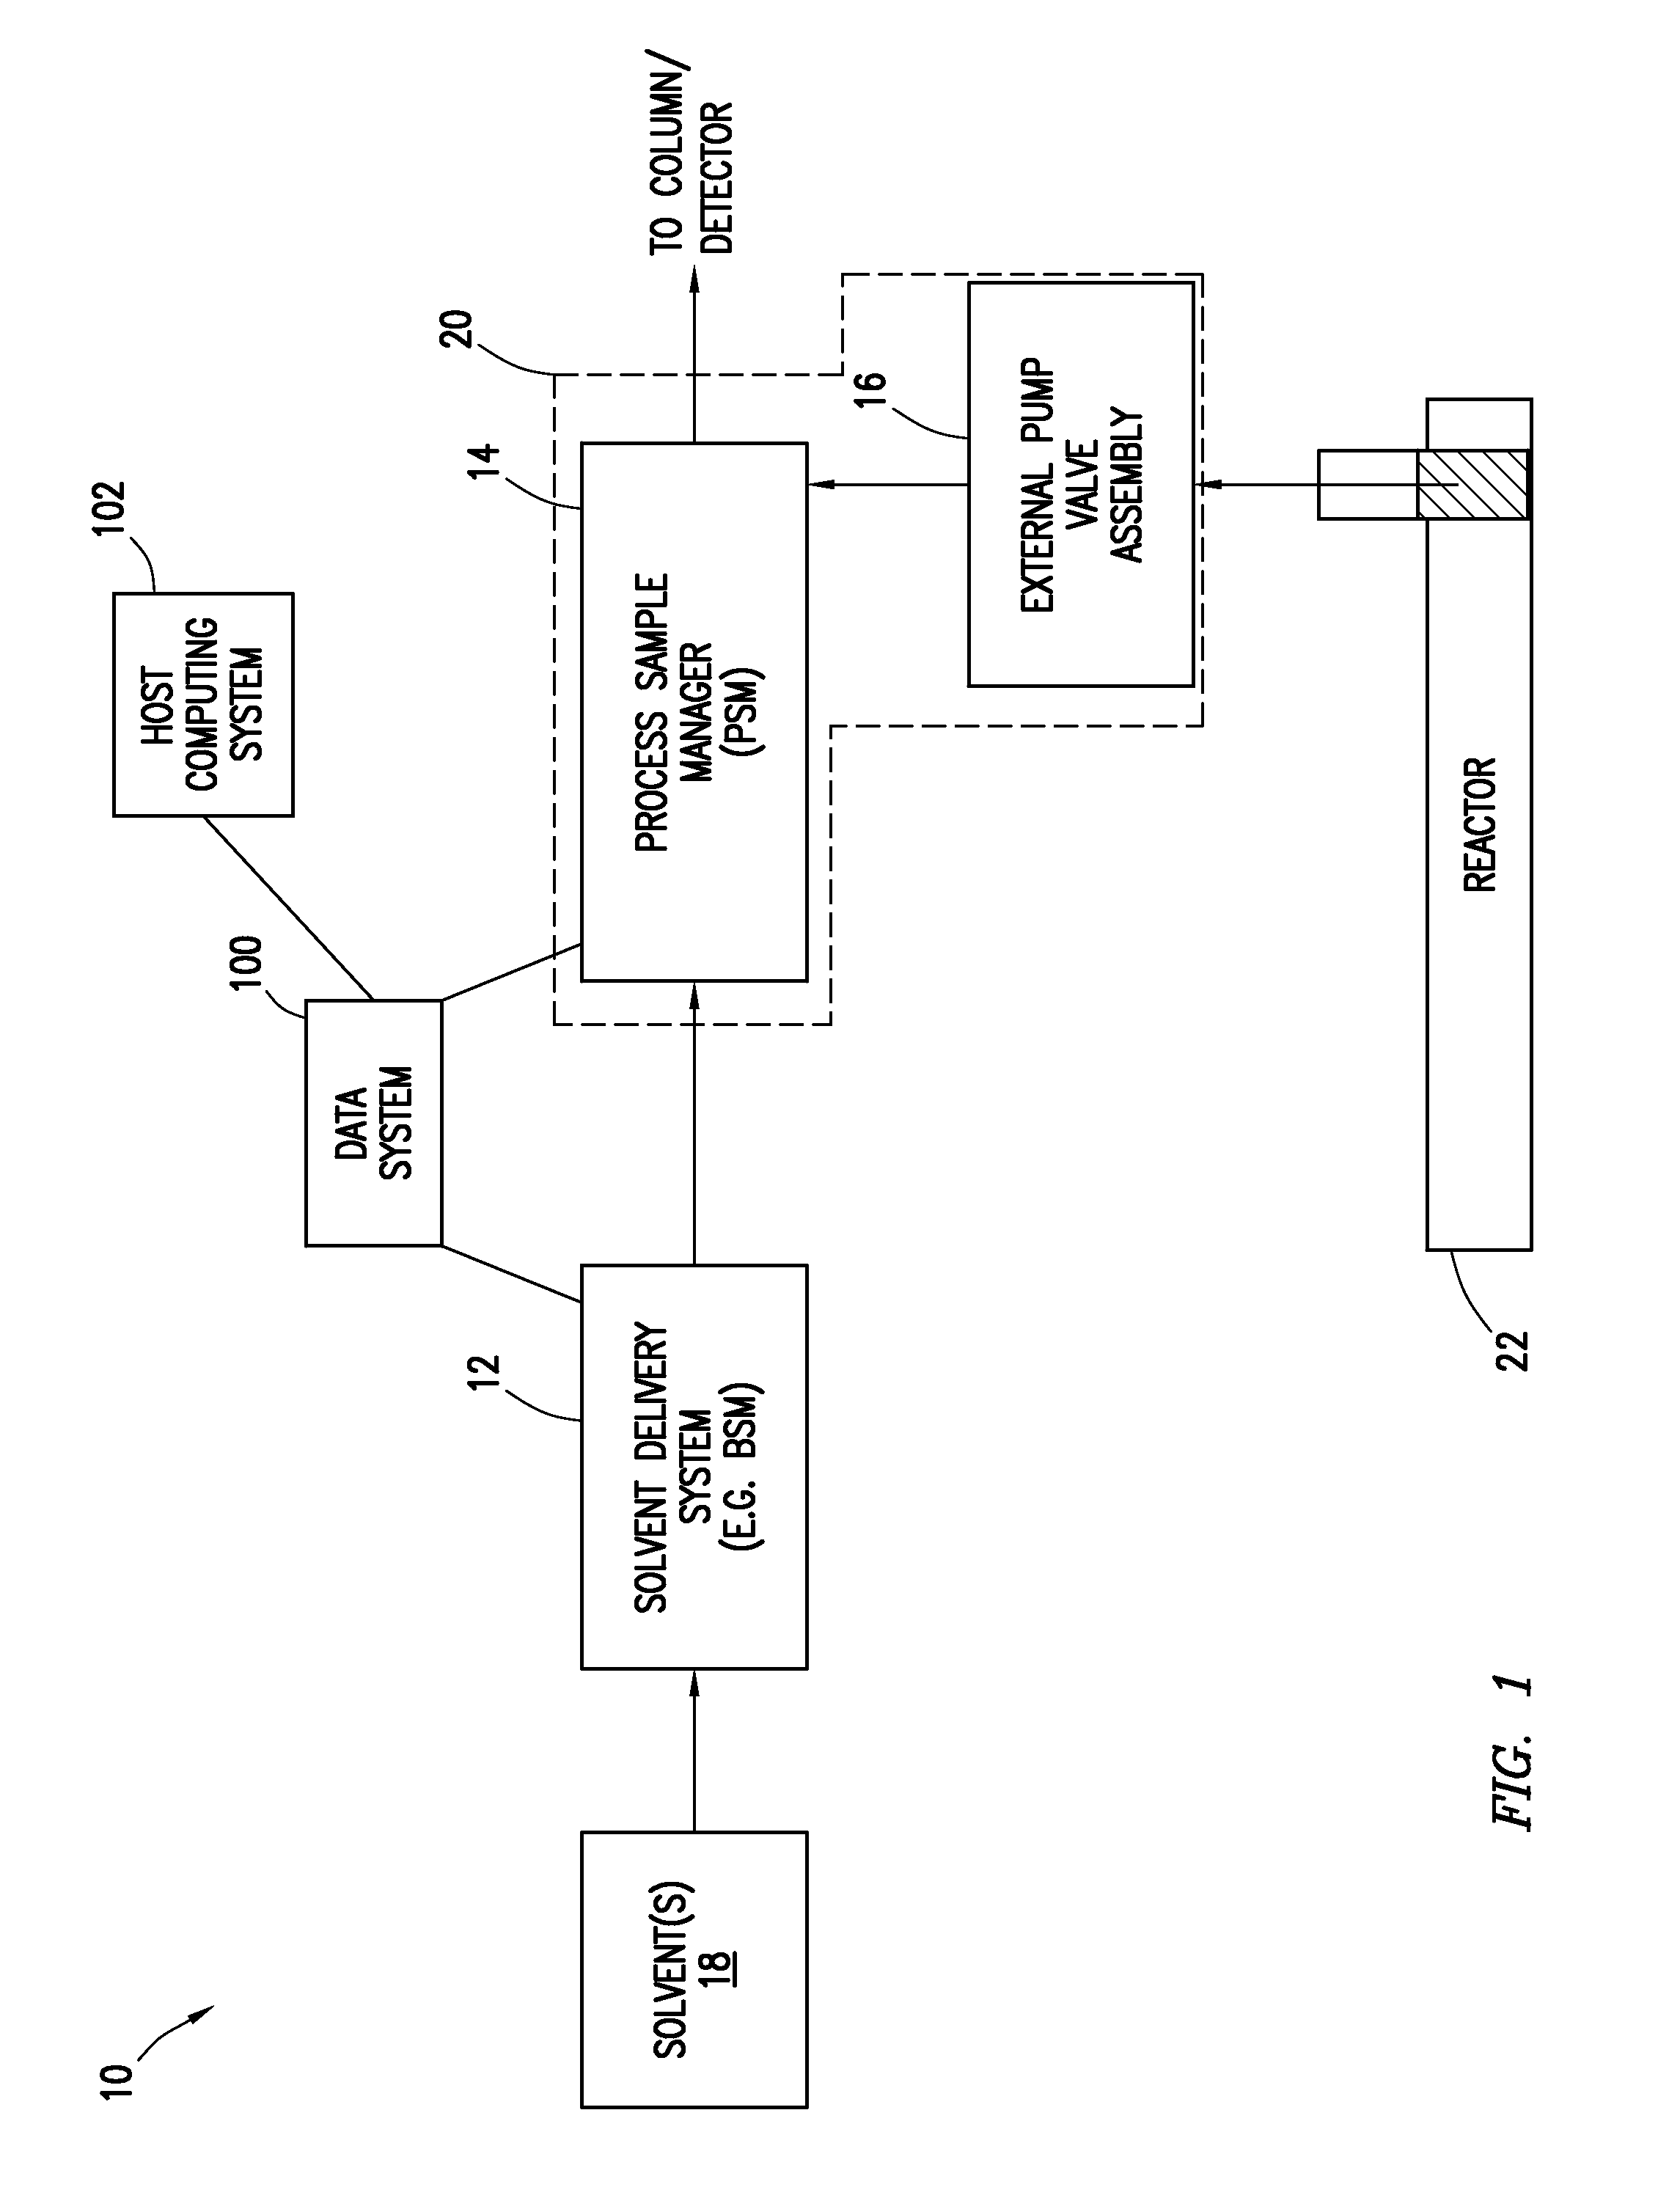 Process sample and dilution systems and methods of using the same